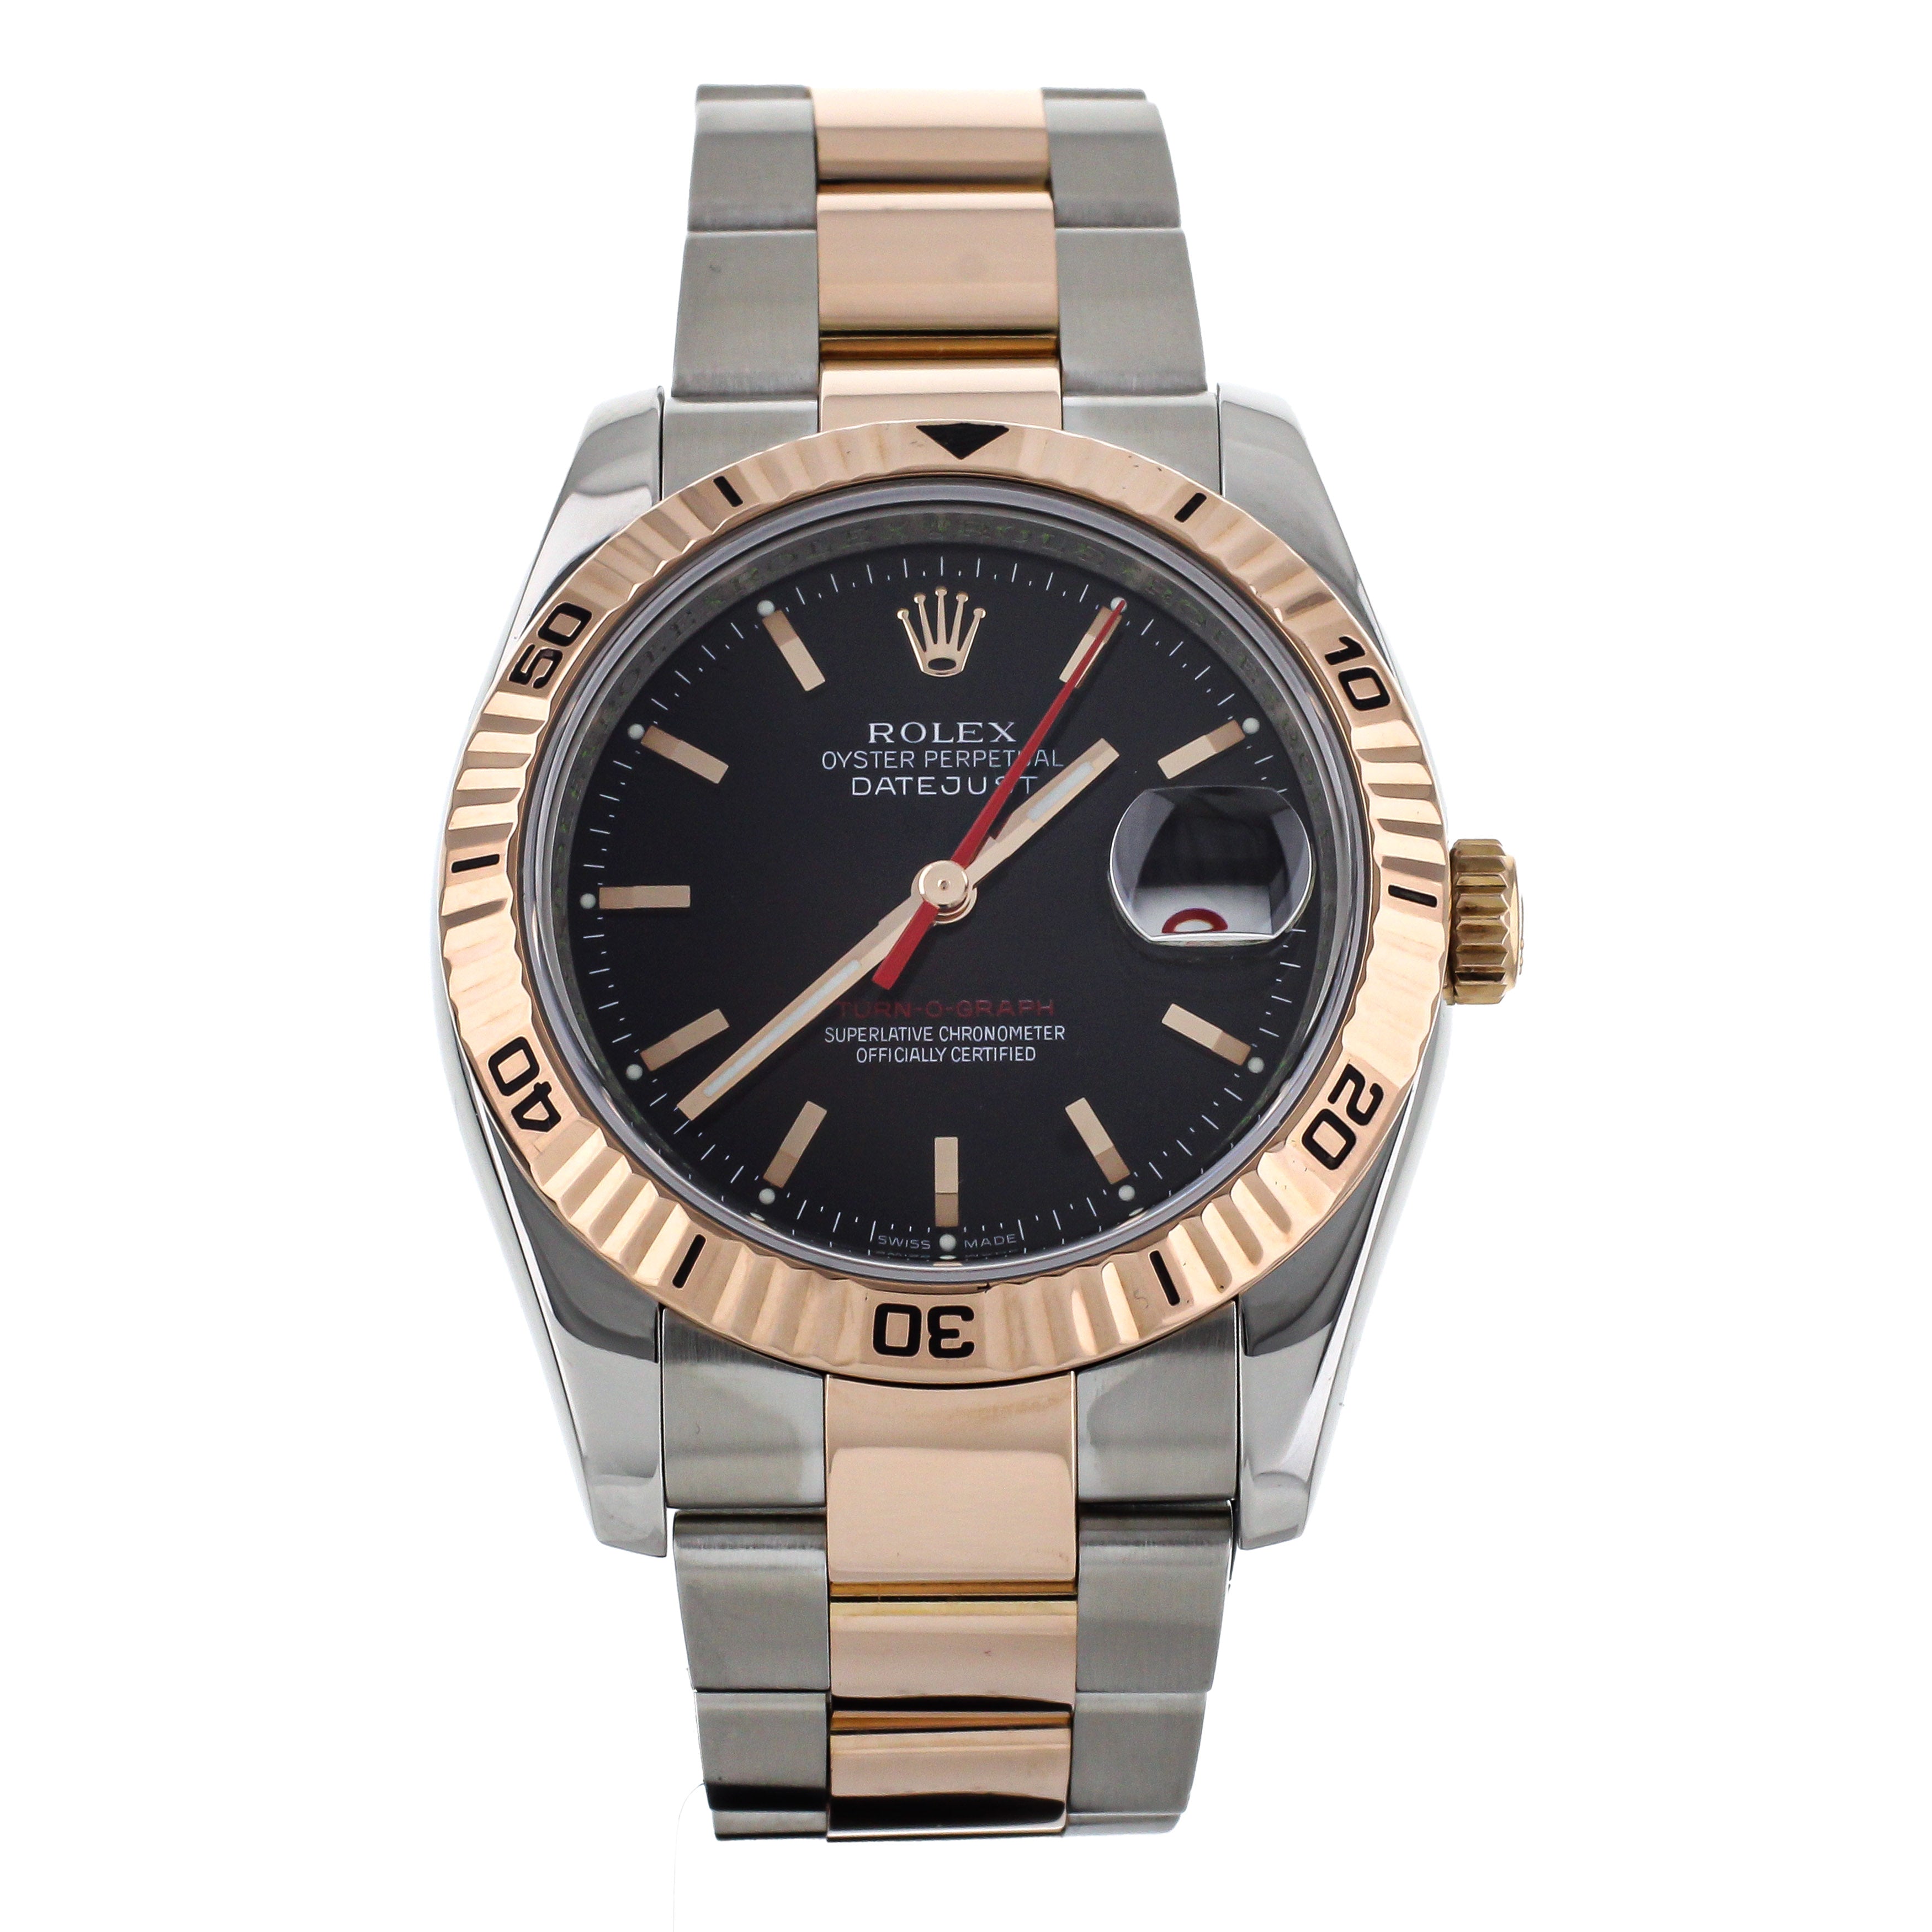 Rolex Datejust Turn-O-Graph Rose Gold & Stainless Steel Black Dial 36mm 116261 Full Set